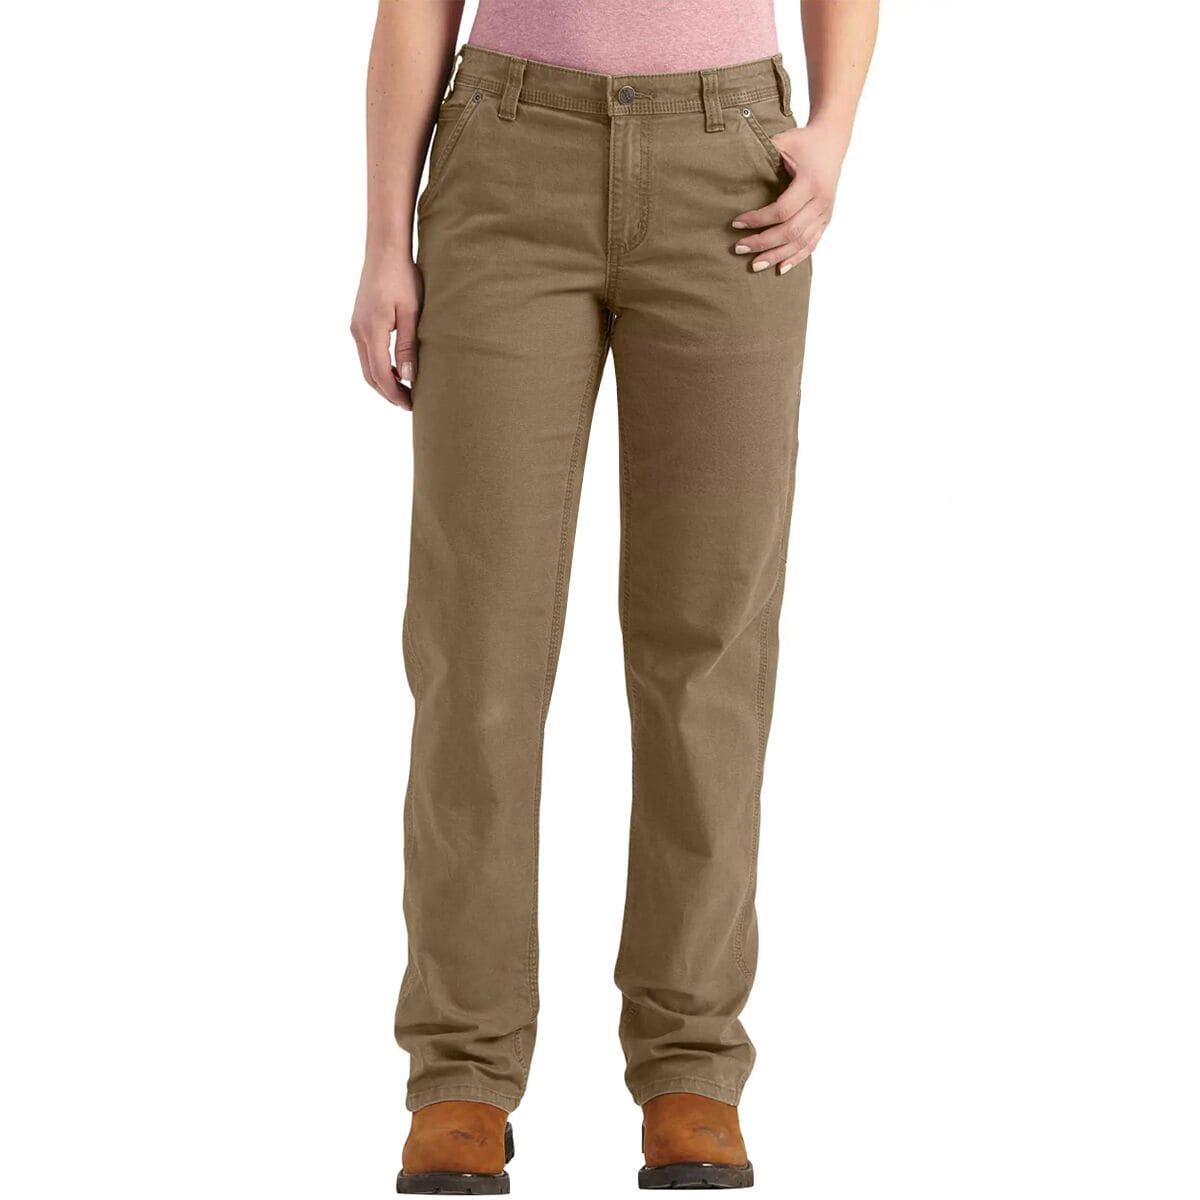 Carhartt Rugged Flex Loose Fit Canvas Work Pant - Women's - Clothing